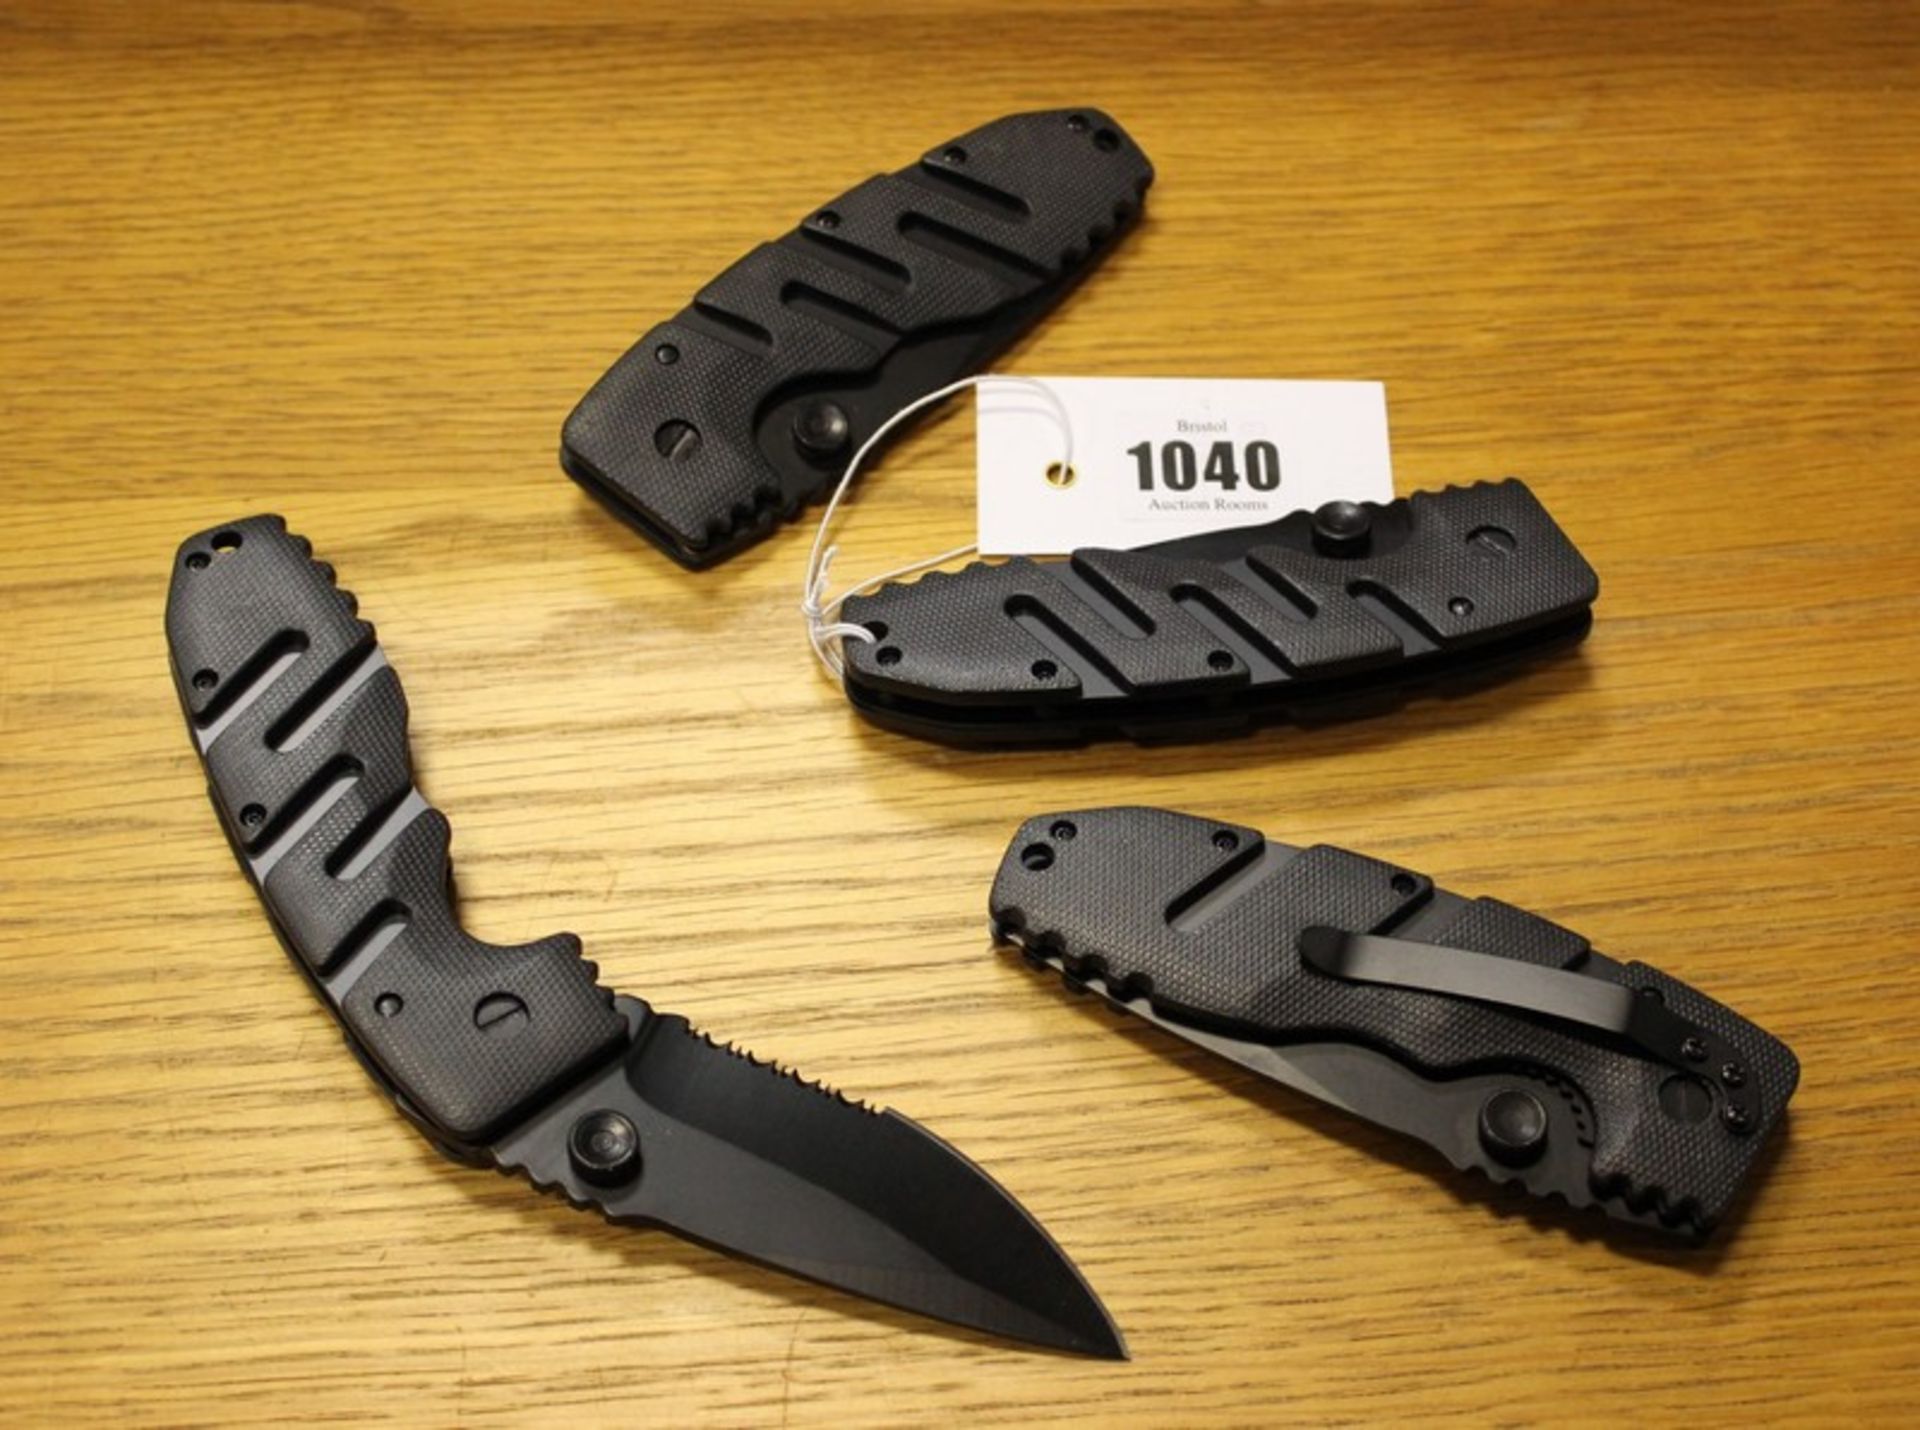 Four new British Army folding knives (Over 18s only).